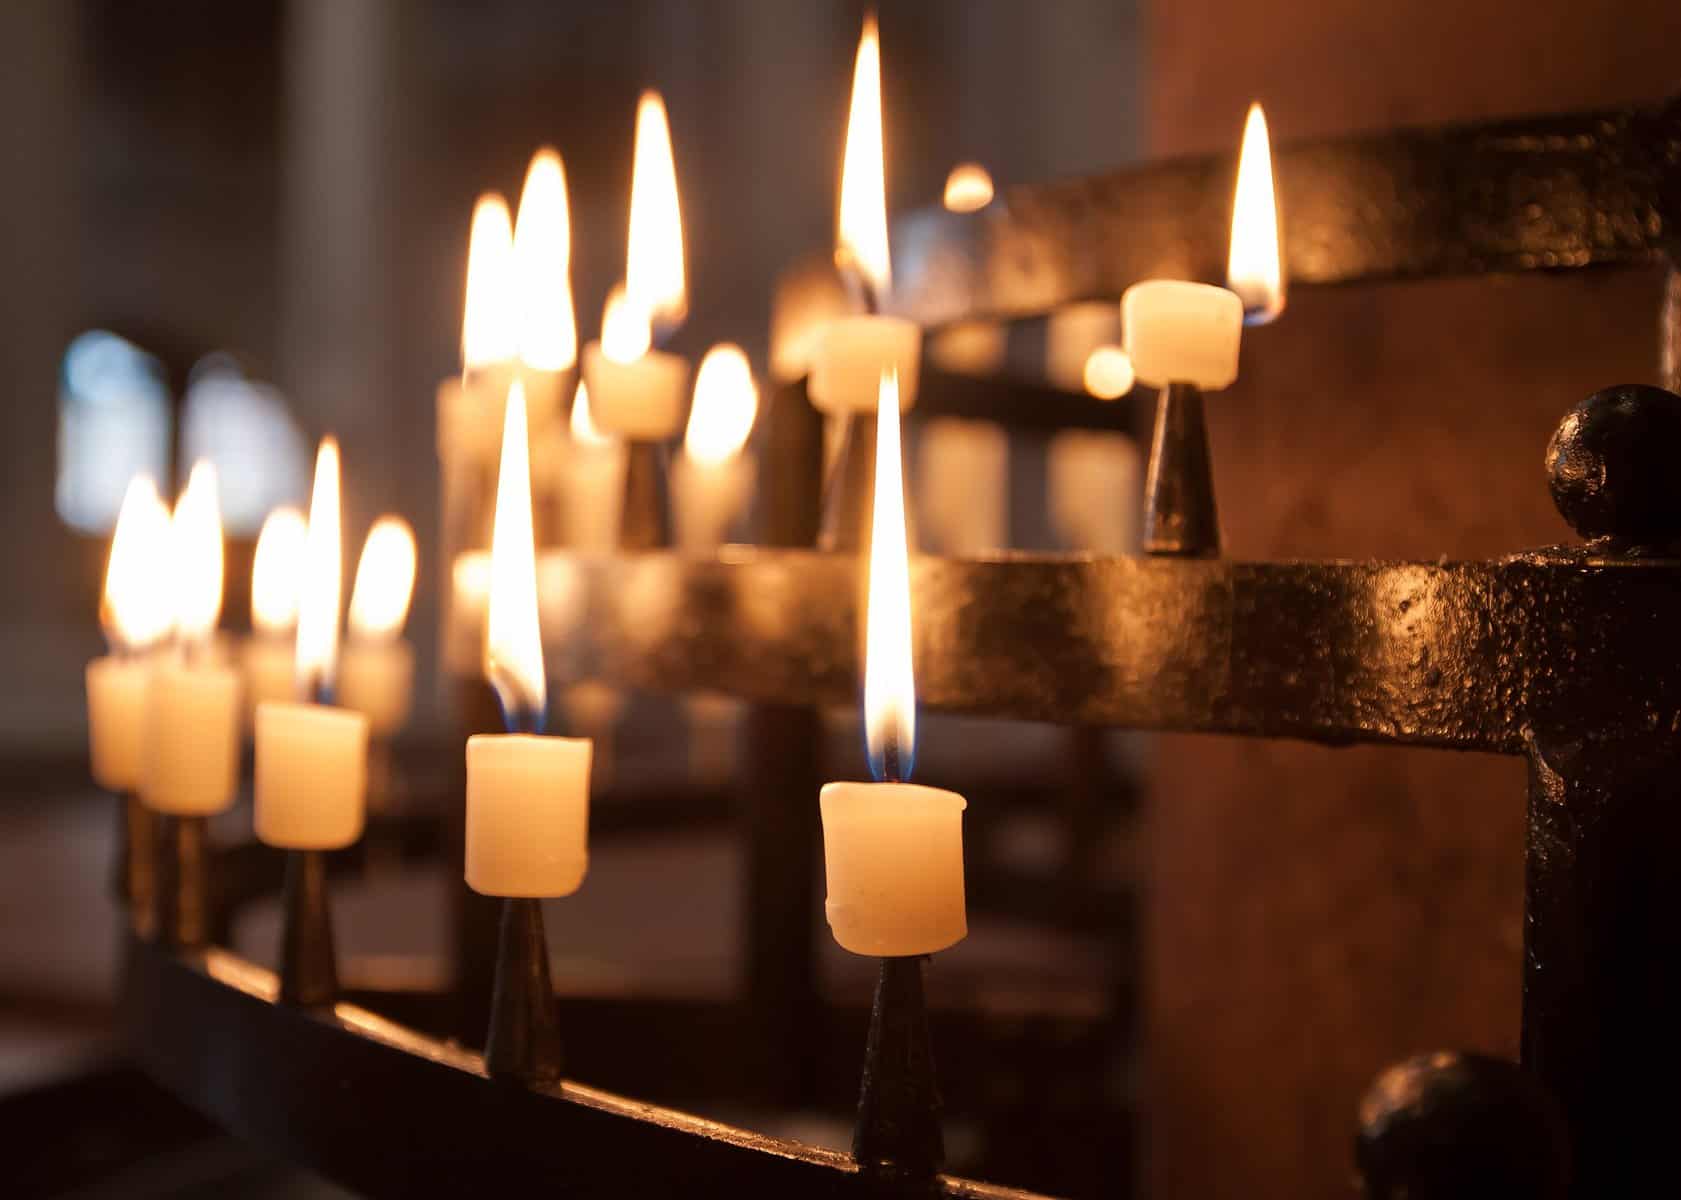 Lit white pillar candles on an iron holder as if on an altar.